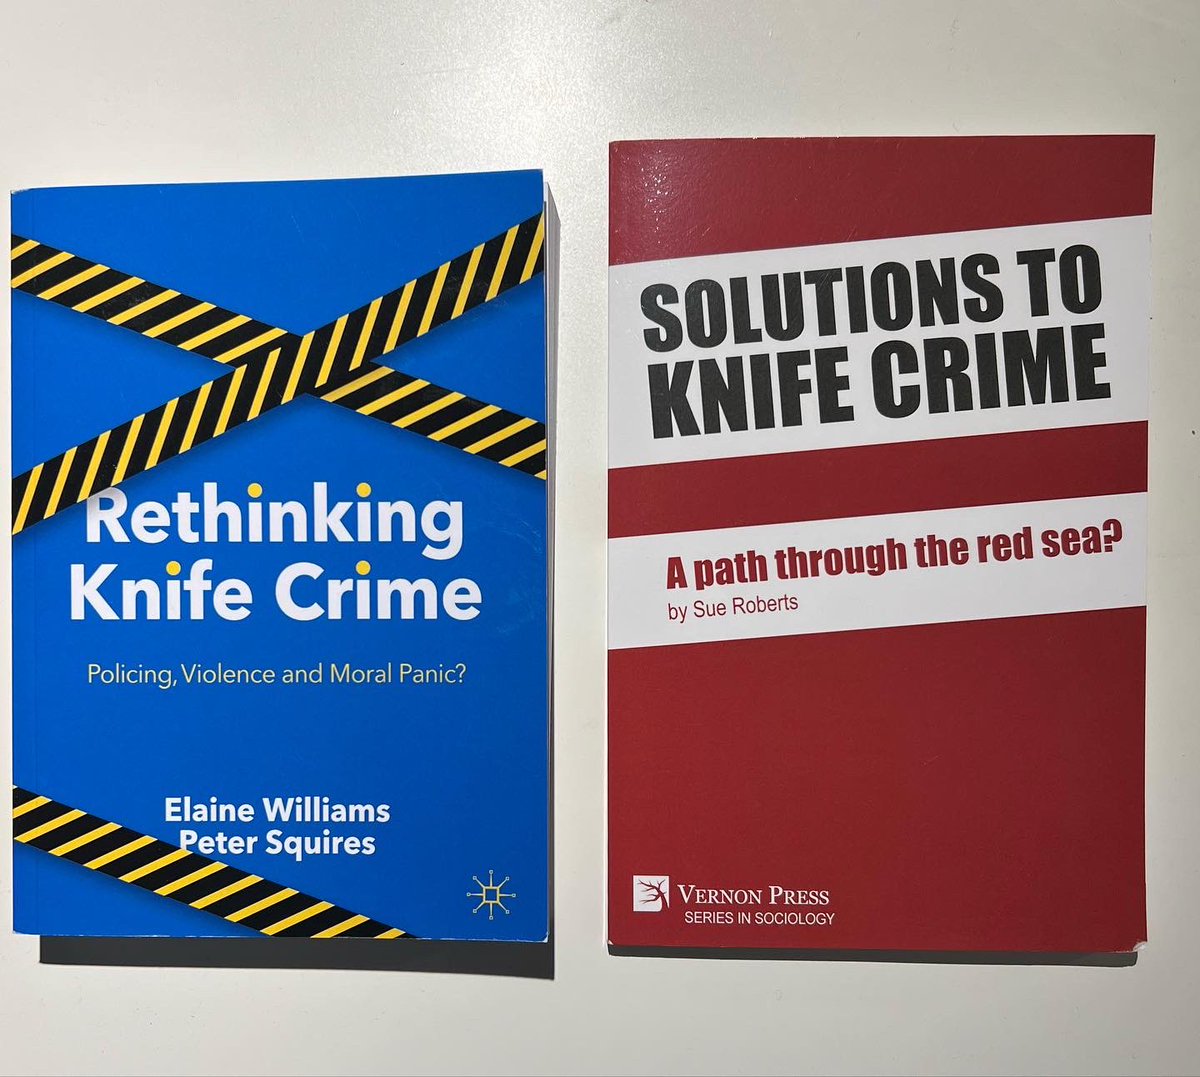 It’s #WorldBookDay today so we thought we’d share a few of our favourite #YouthJustice #knifecrimeprevention and #traumainformedpractice books📚 🤩 #NotAnAd #AlwaysLearning #YJSLibrary @_LisaCherry @Andibrierley @DrElaineW